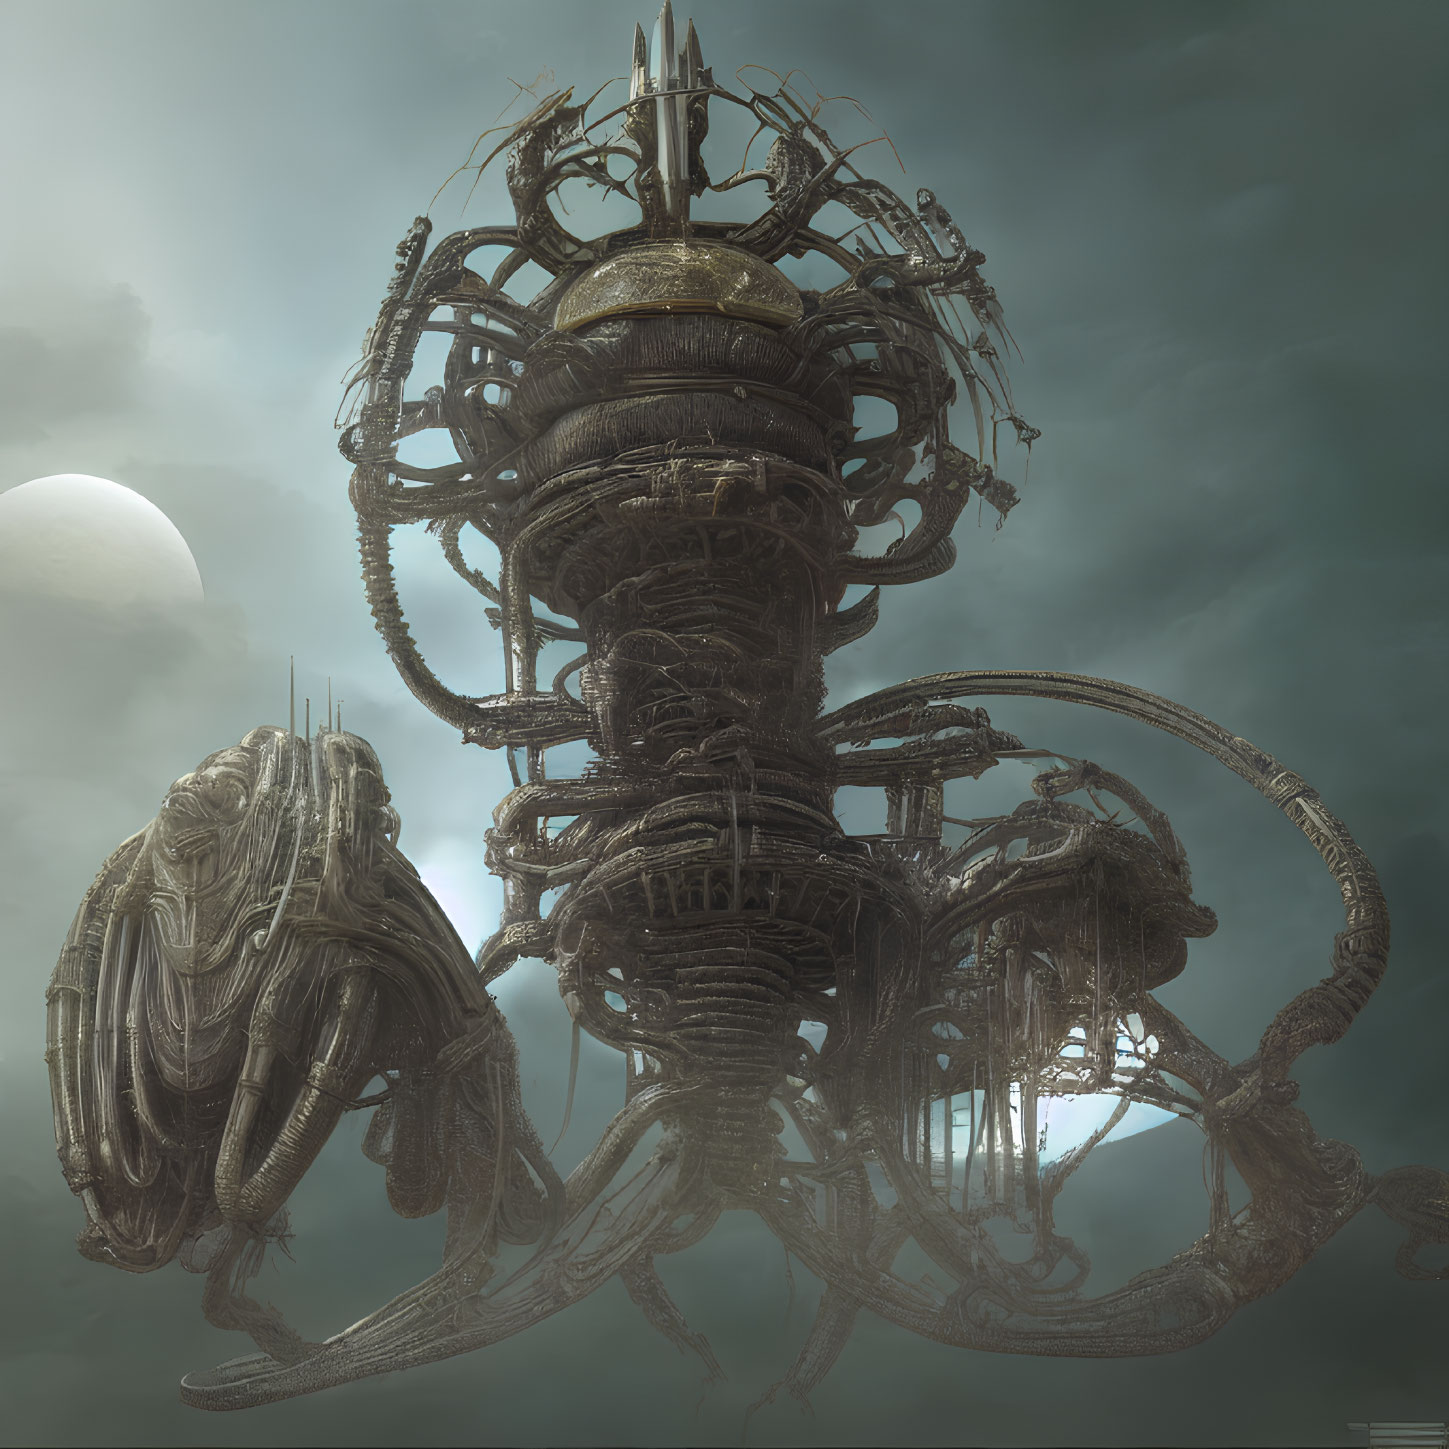 Dark mechanical alien tower with tangled wires and pipes under a pale sun